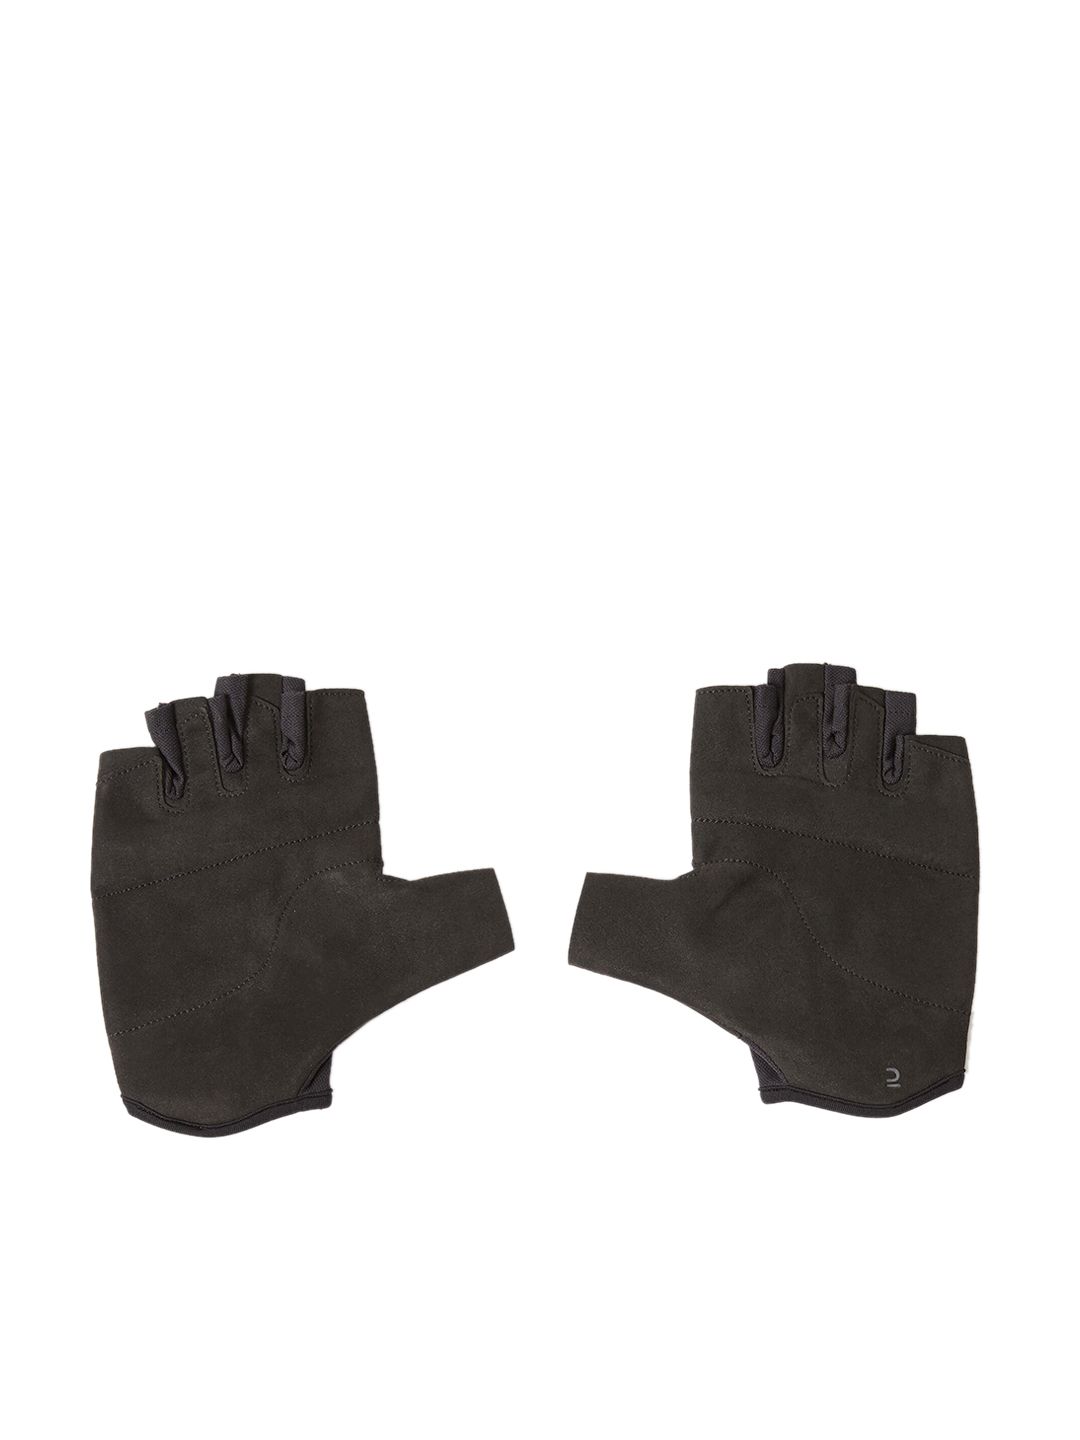 Domyos By Decathlon Black Set Of 2 Of Solid Weight Training  Gloves Price in India